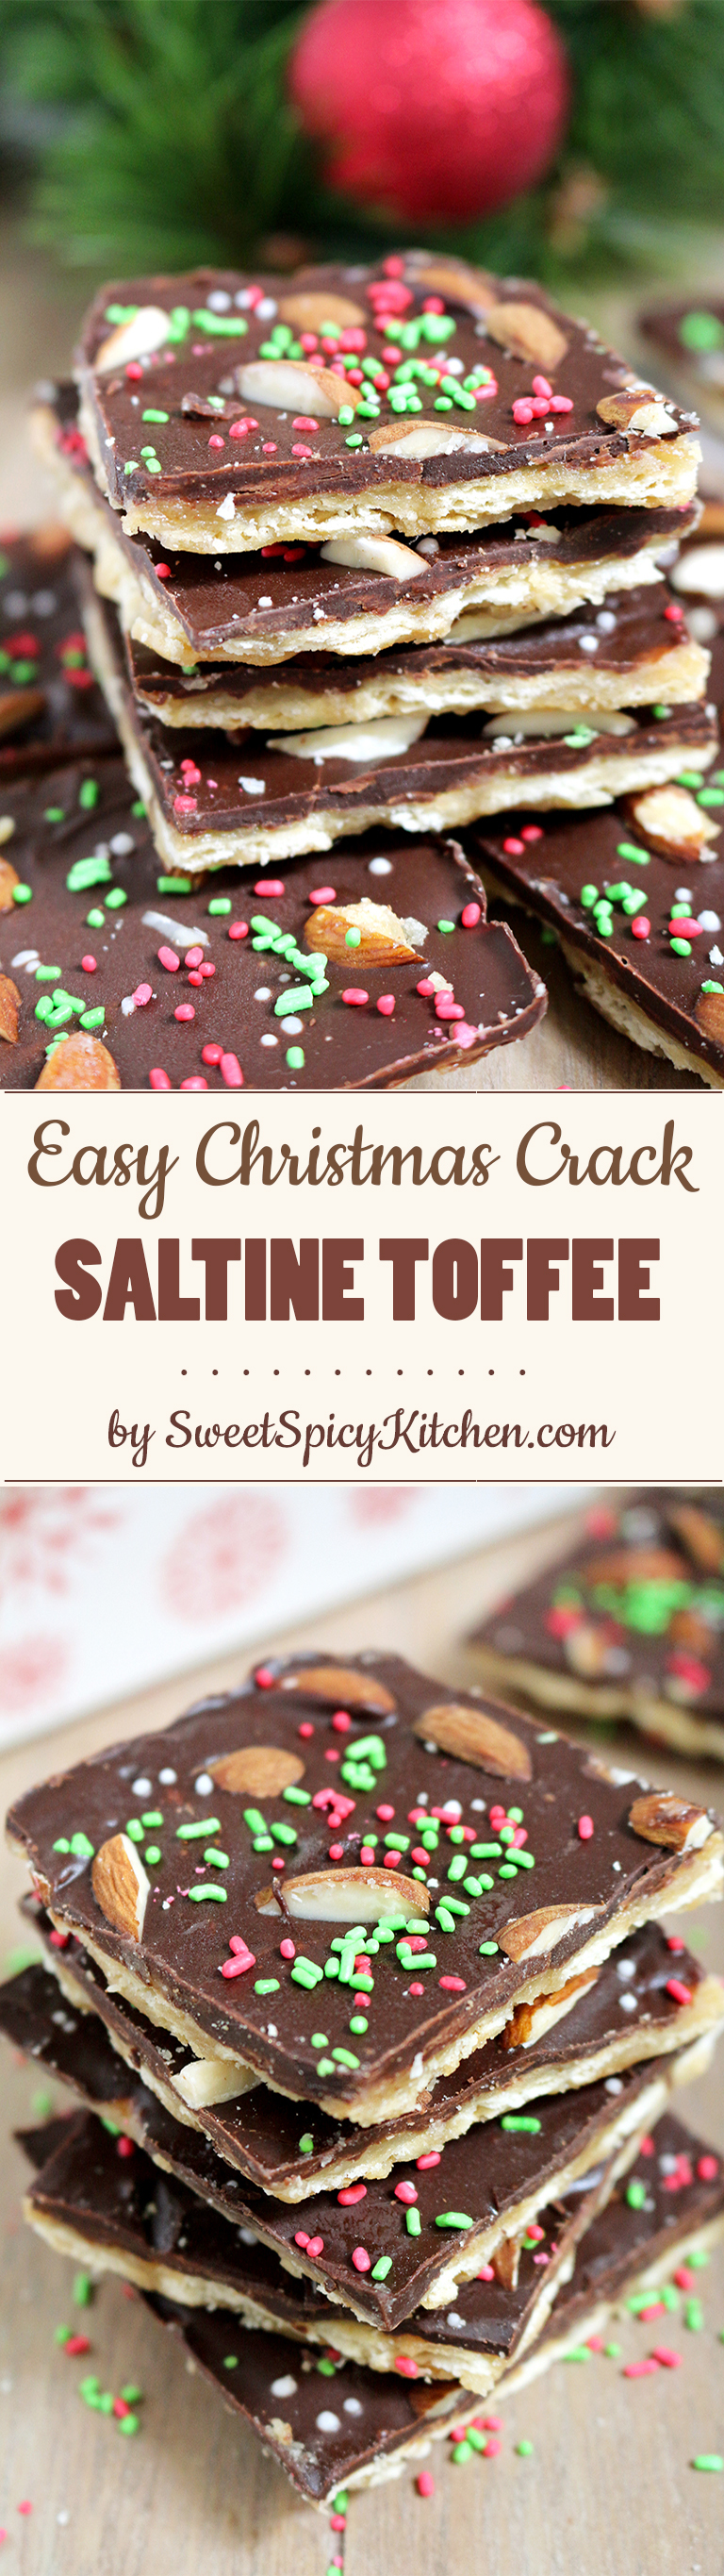 Easy Christmas Crack Saltine Toffee is a perfect crunchy Christmas treat. It‘s a last minute dessert for all those who don‘t have enough time for preparing holiday desserts.